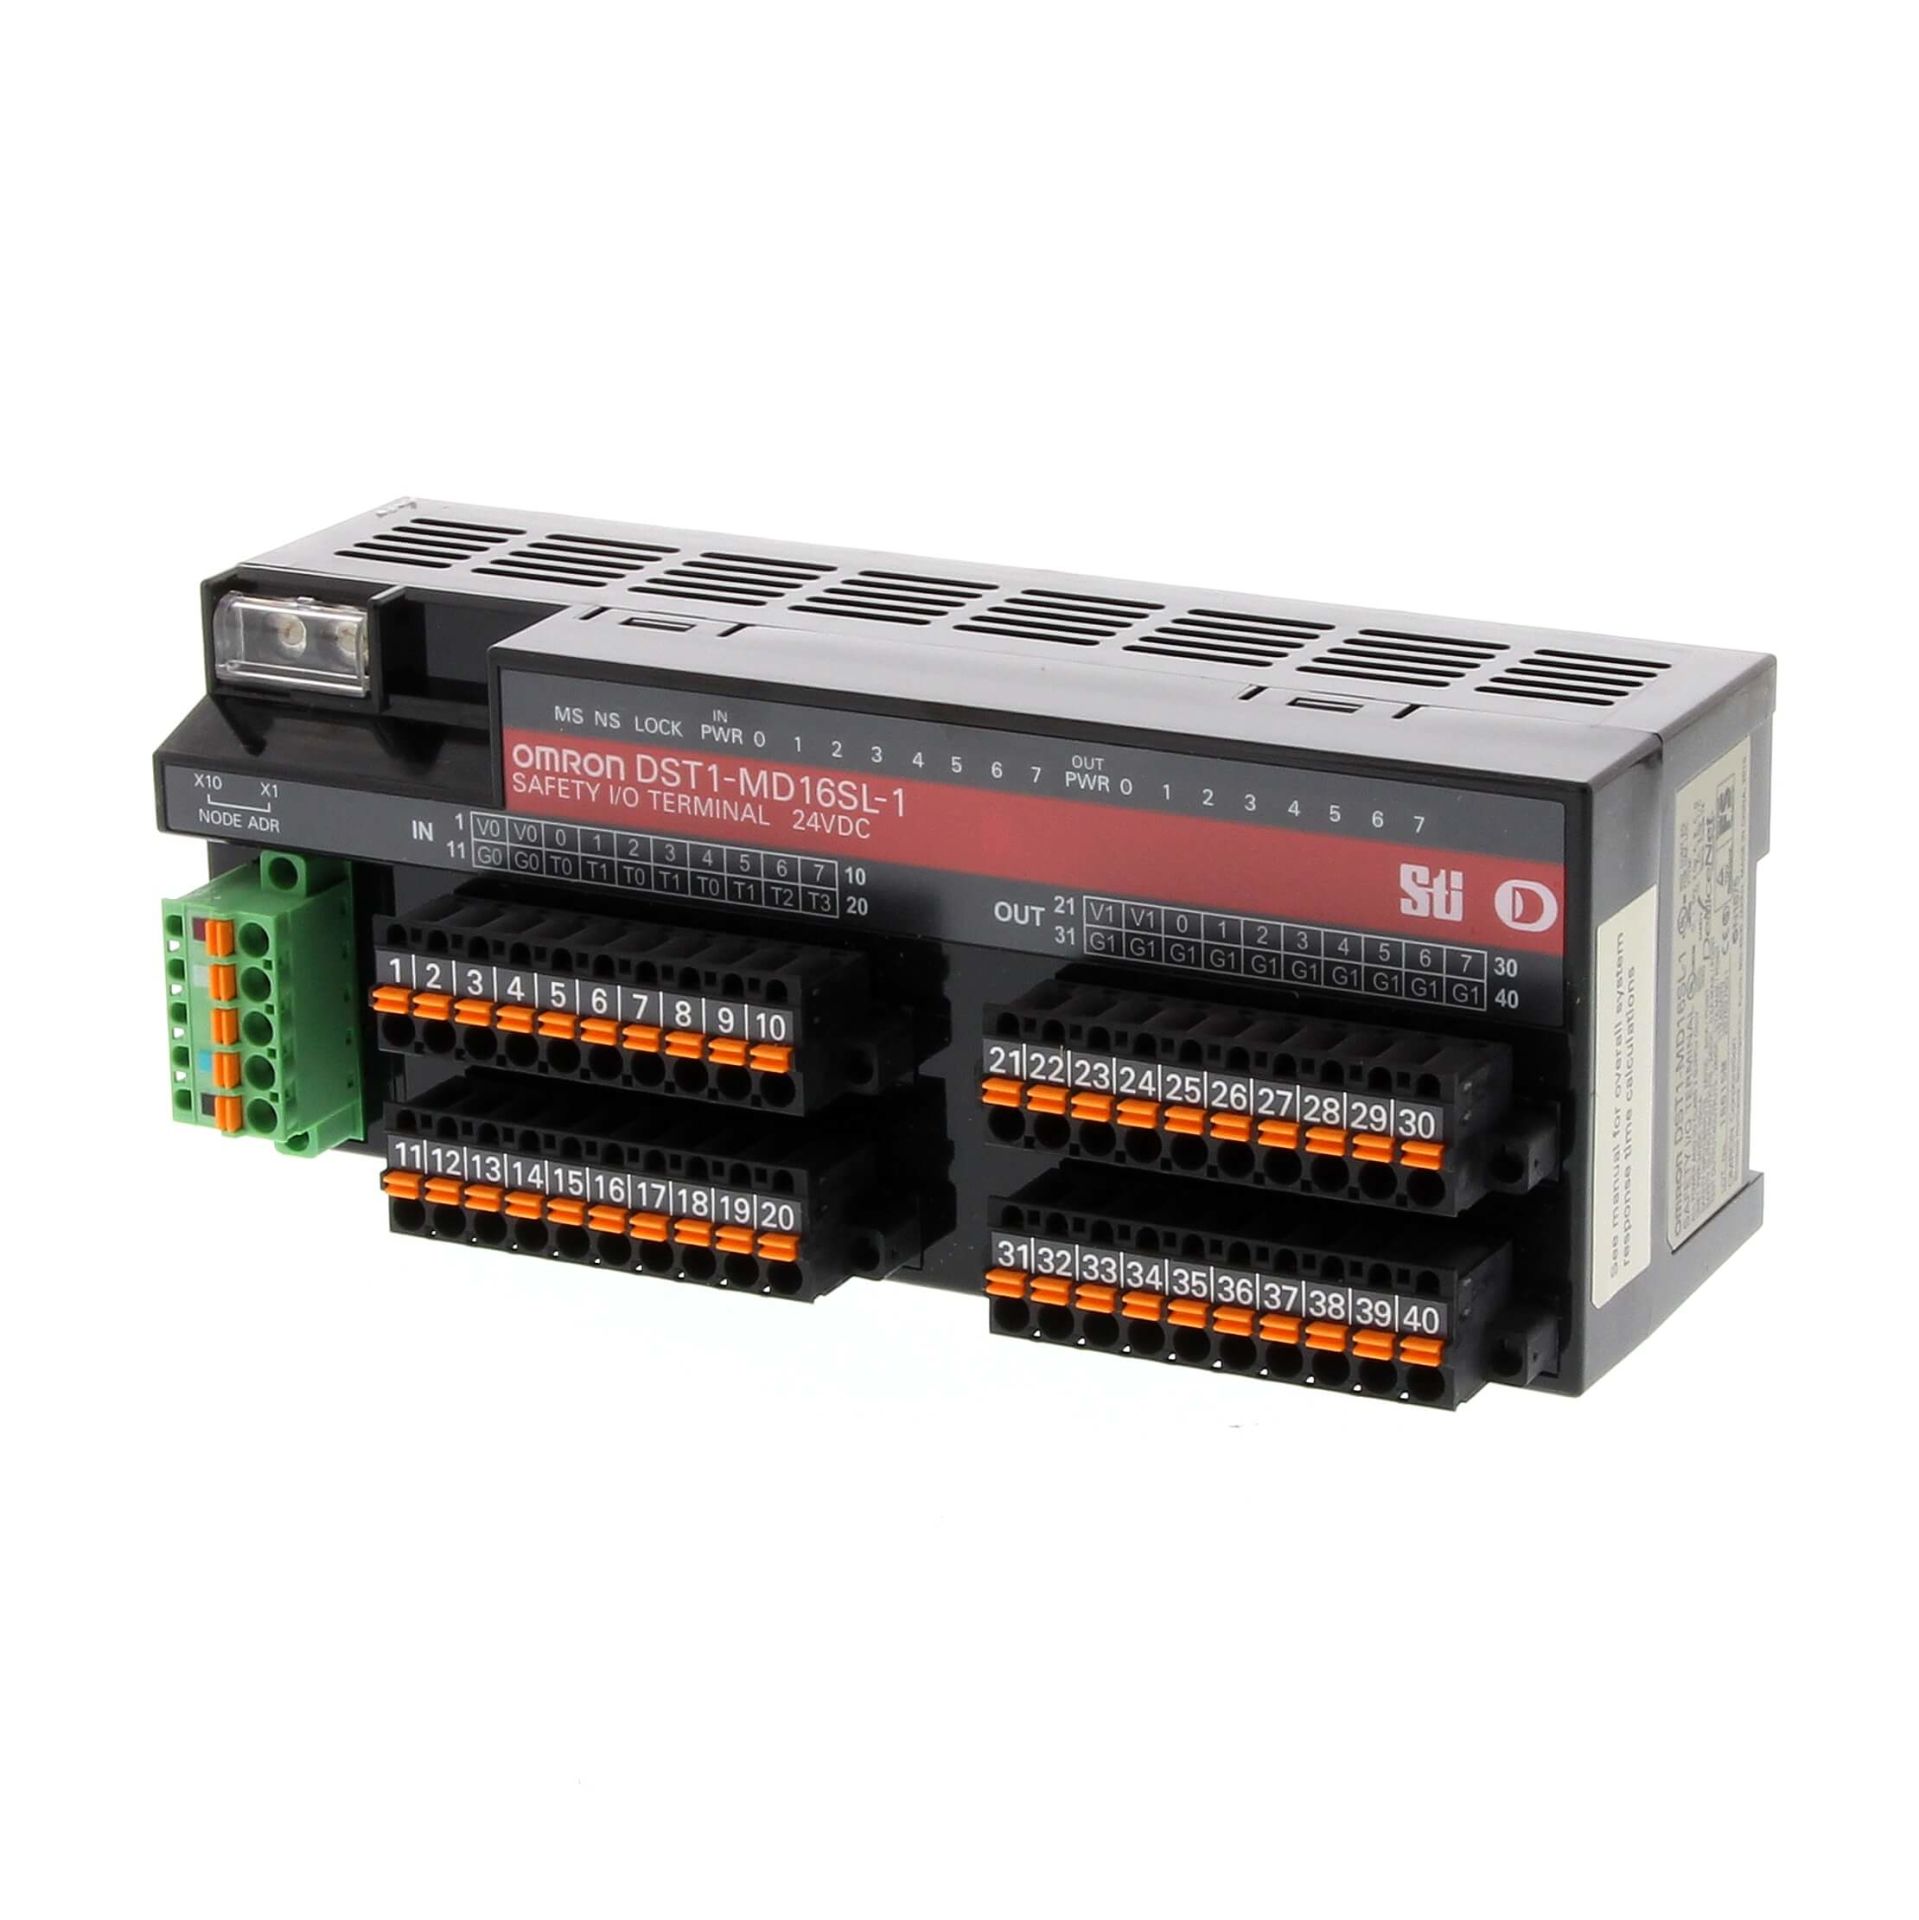 Omron - DST1-MD16SL-1  Remote I/O terminal, 8 x PNP inputs, 8 x PNP outputs, 4 x test outputs